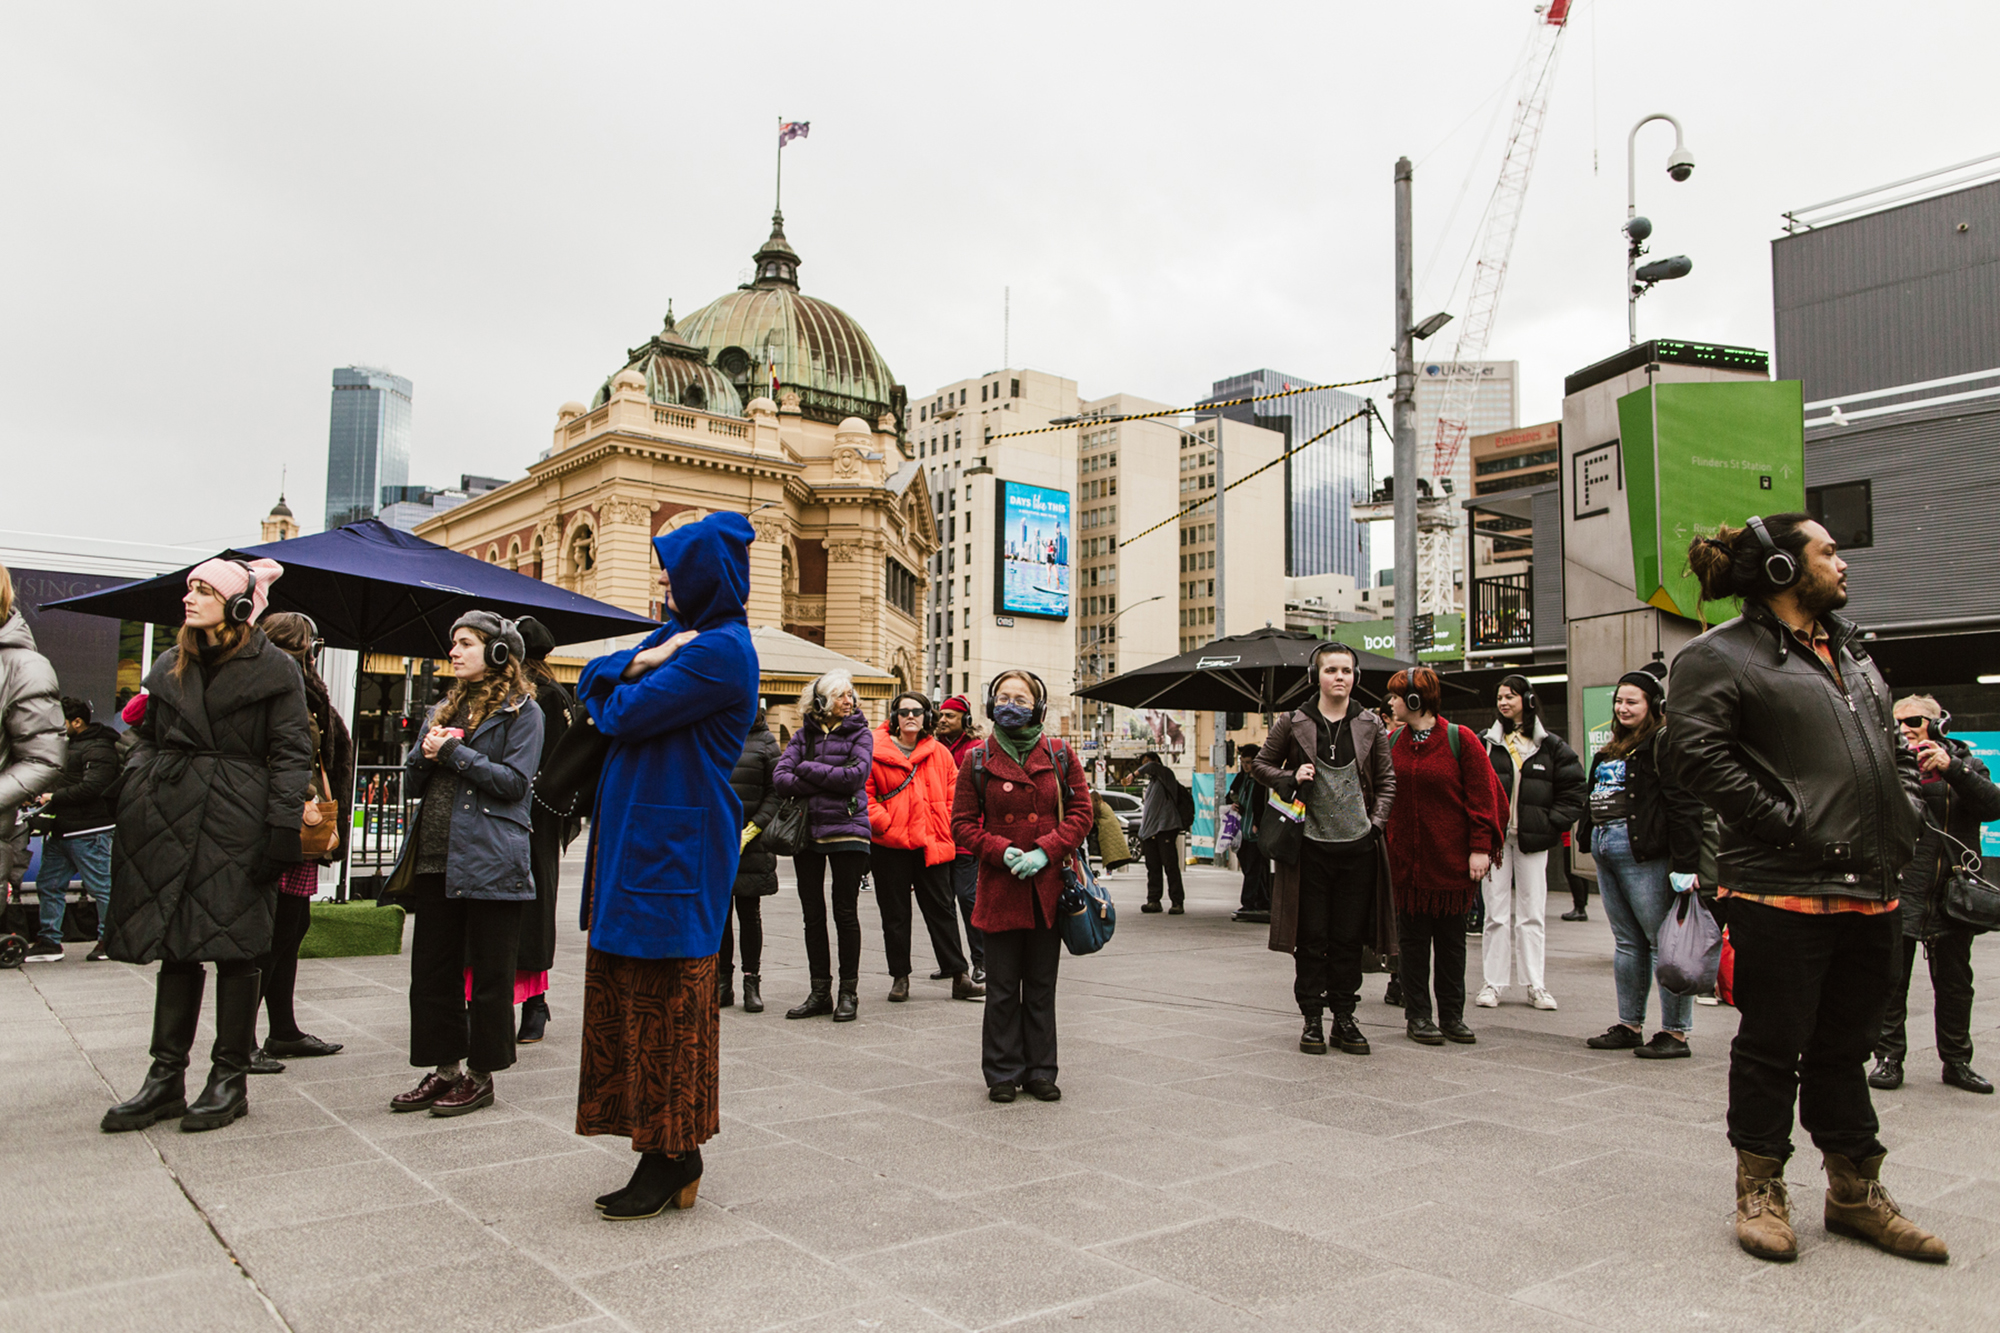 A crowd of people stand in Melbourne's Federation Square on a gray, overcast day.  They are wearing headphones.